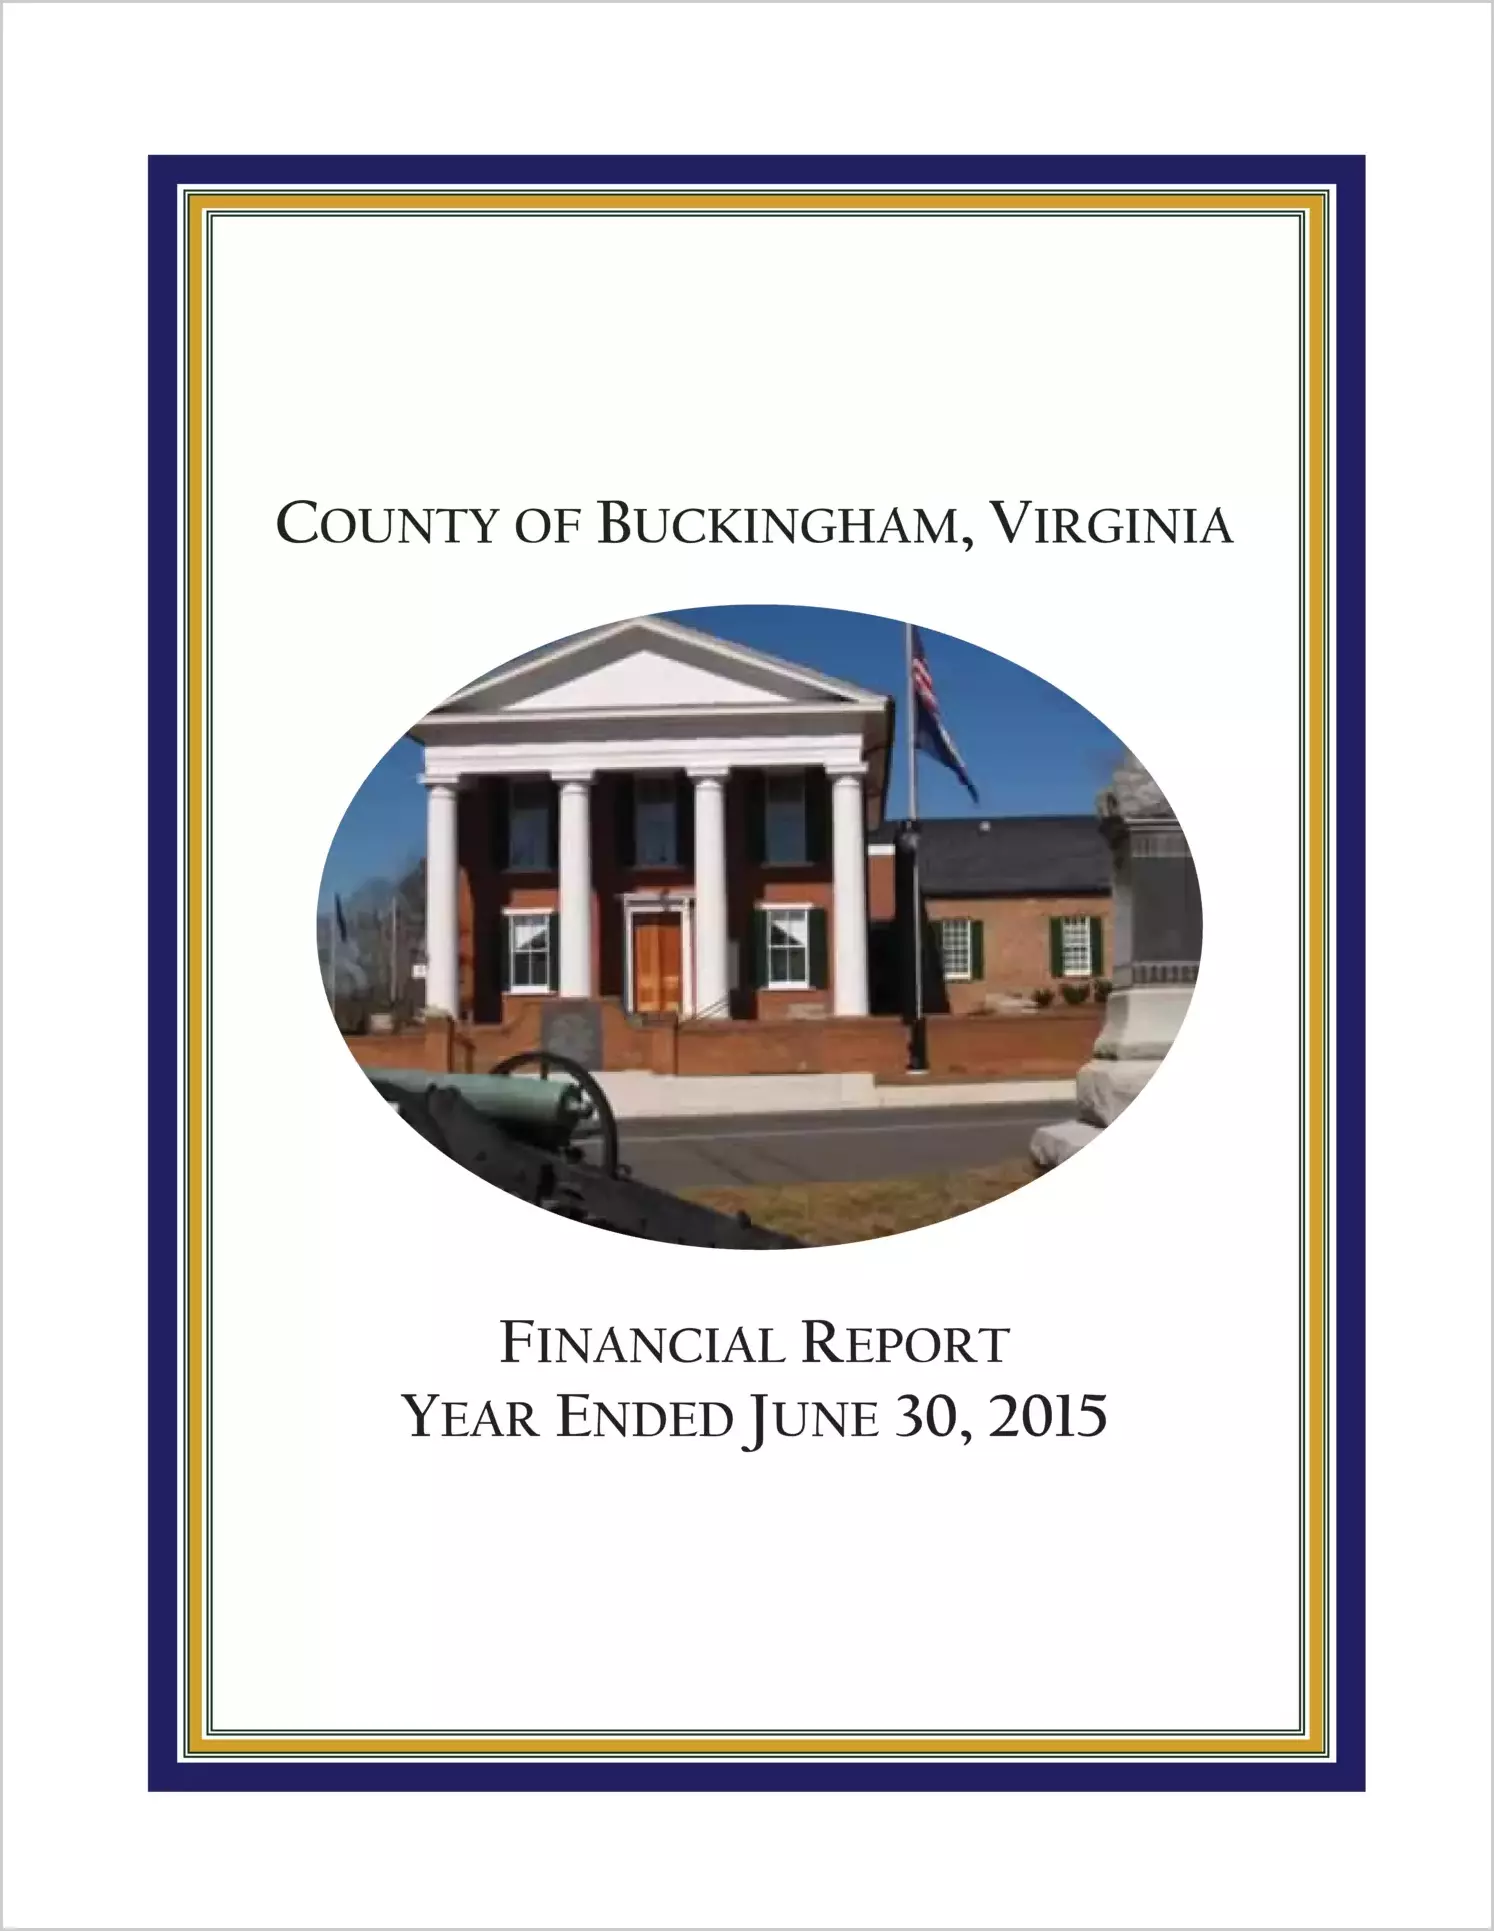 2015 Annual Financial Report for County of Buckingham